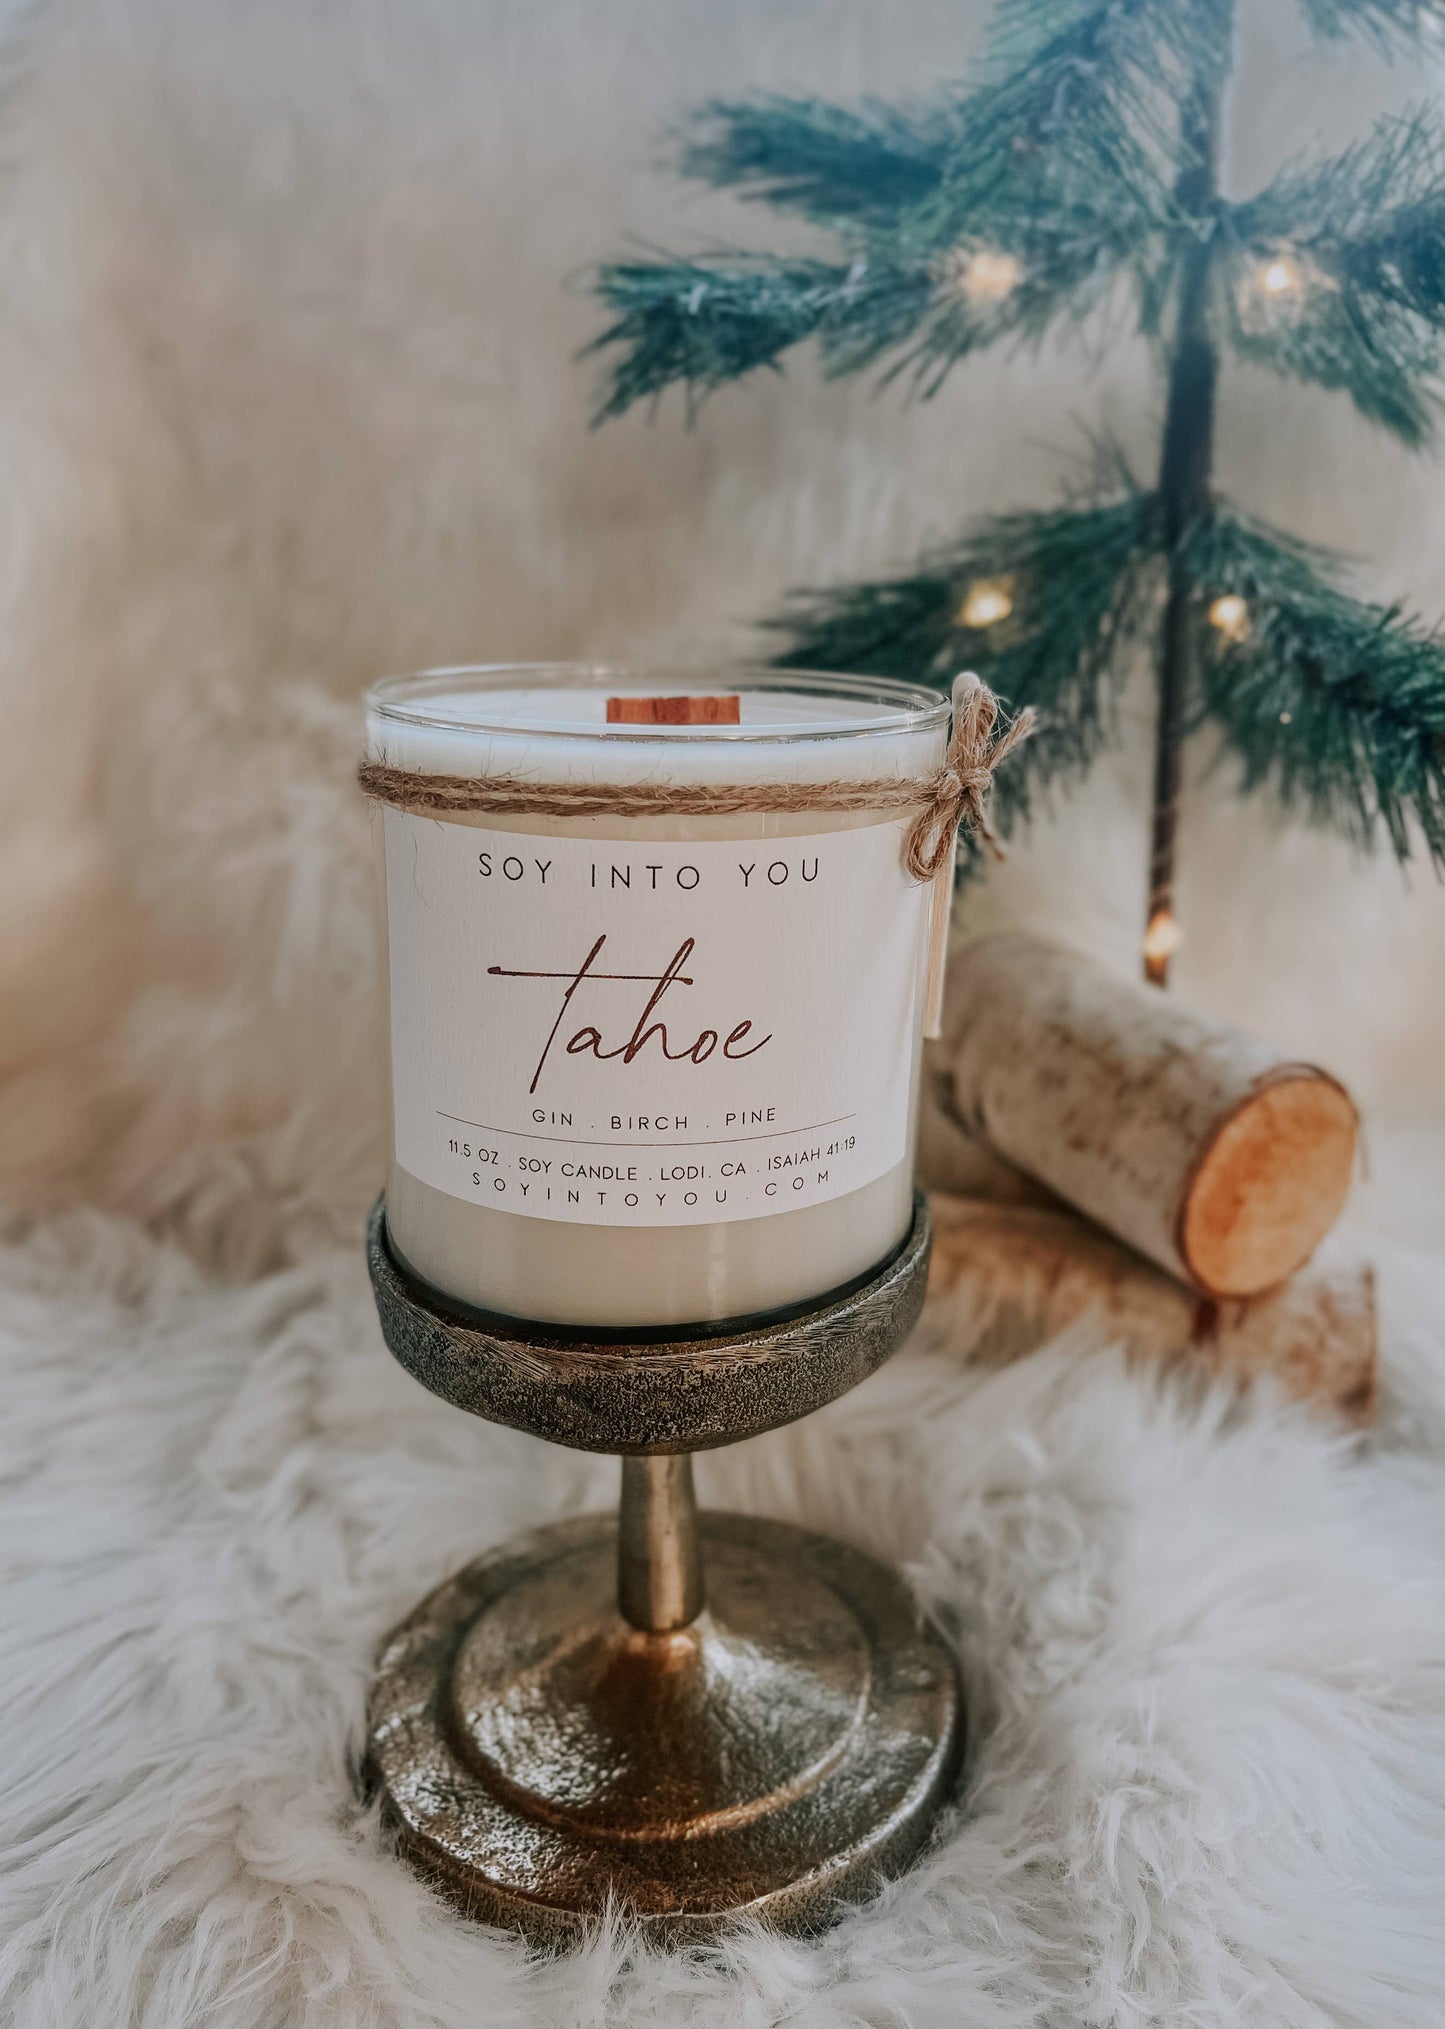 Soy Into You - Tahoe: Wood Wick